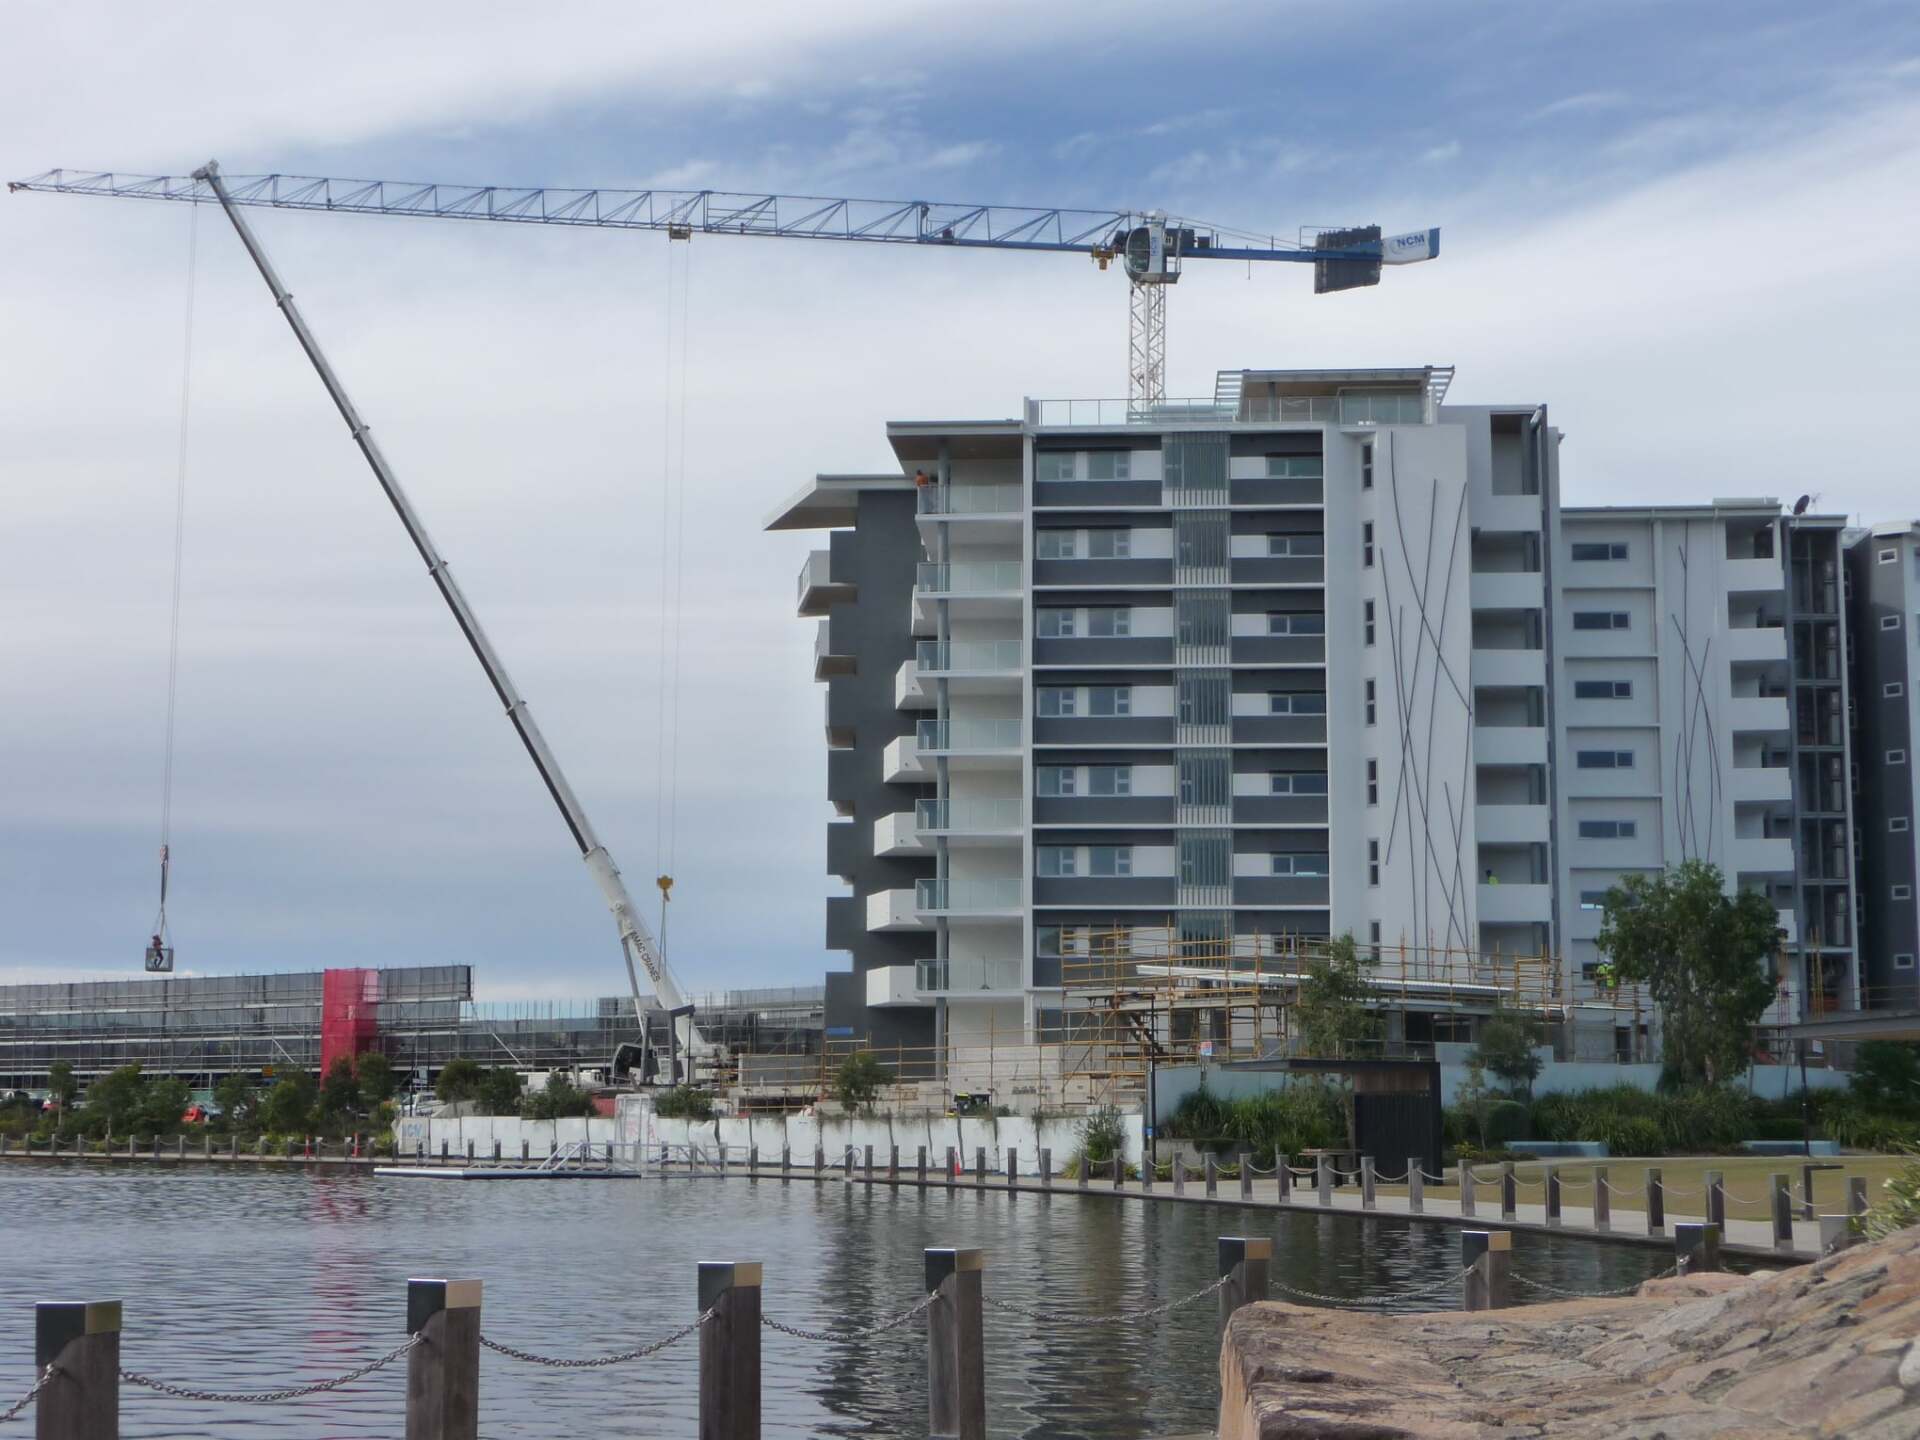 A crane on top of a building on the Sunshine Coast